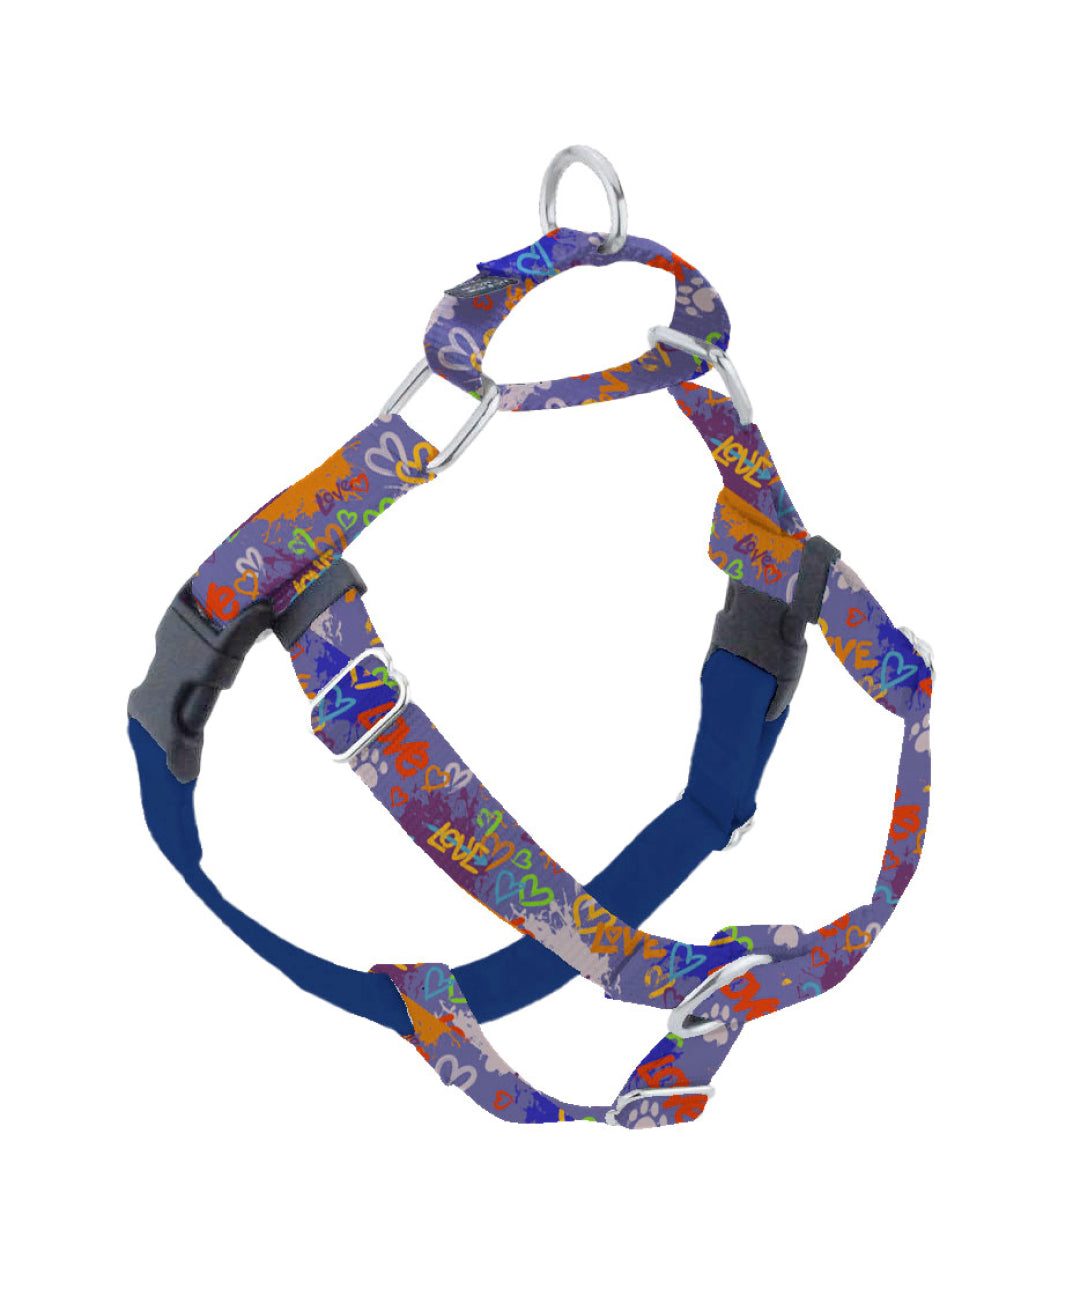 2 Hounds EarthStyle Freedom No-Pull Dog Harness Walking Gear Rover Store XS Blue Graffiti 